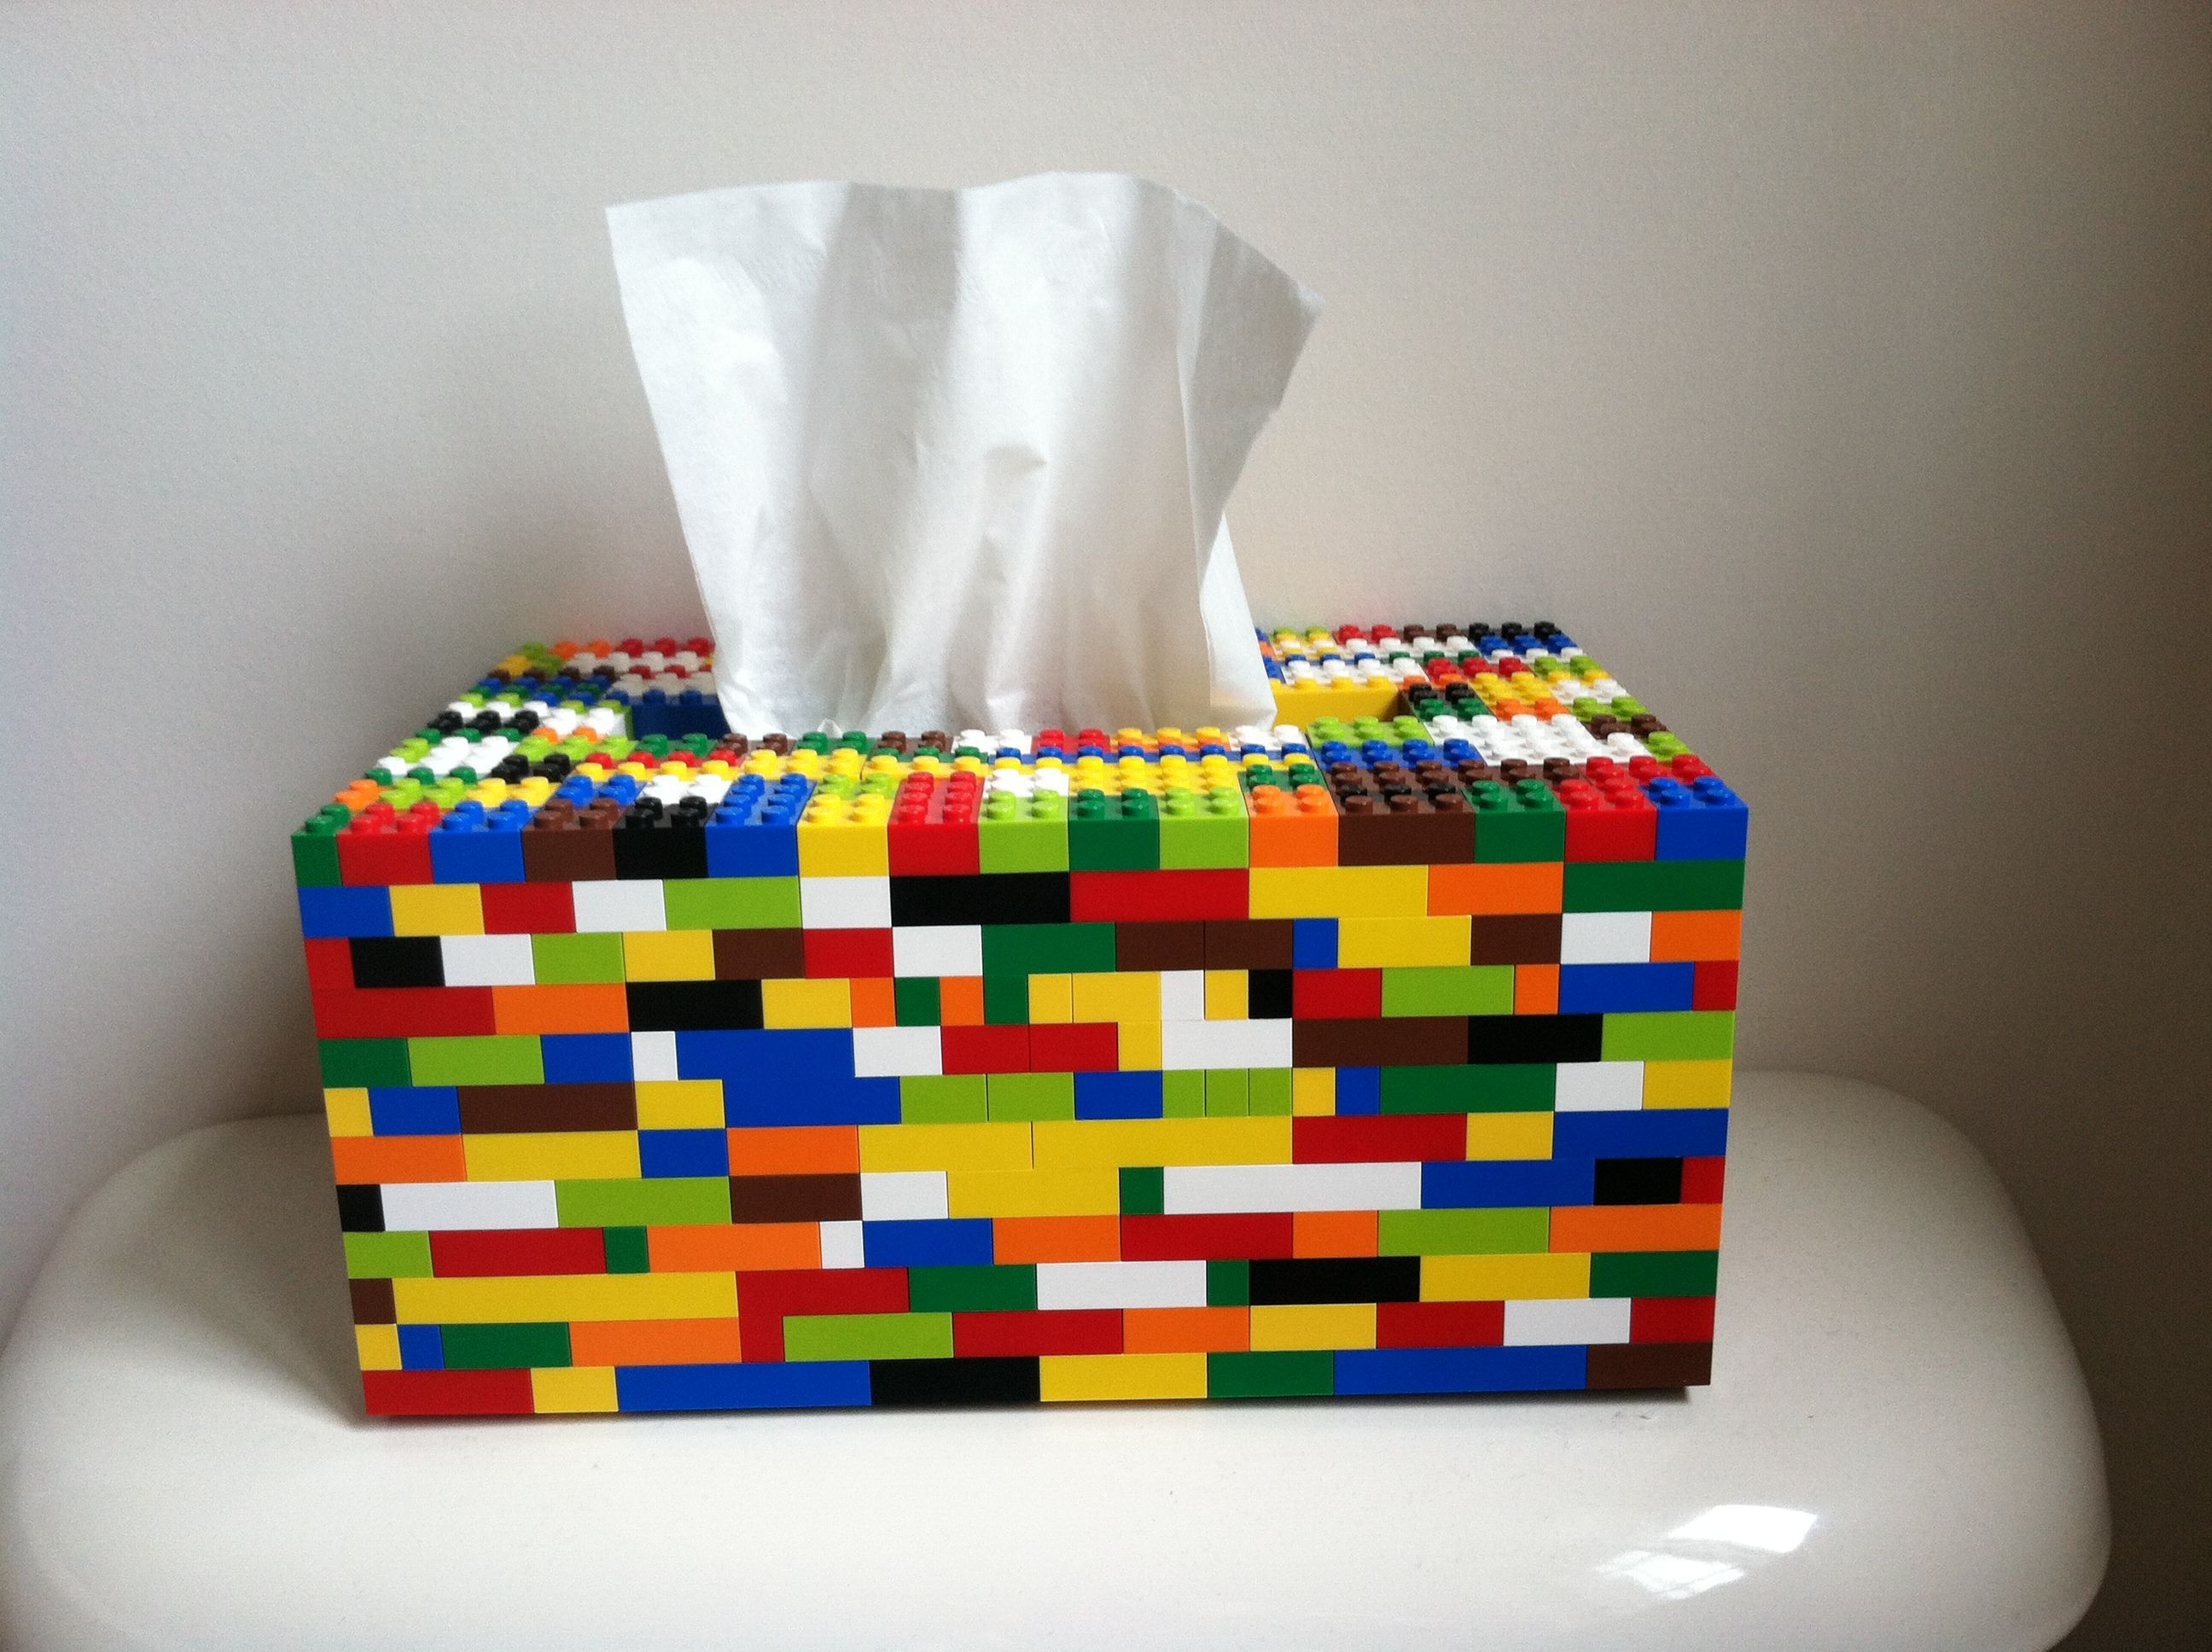 Tissue box cover made from actual lego pieces. I may have to have my nephew make this…